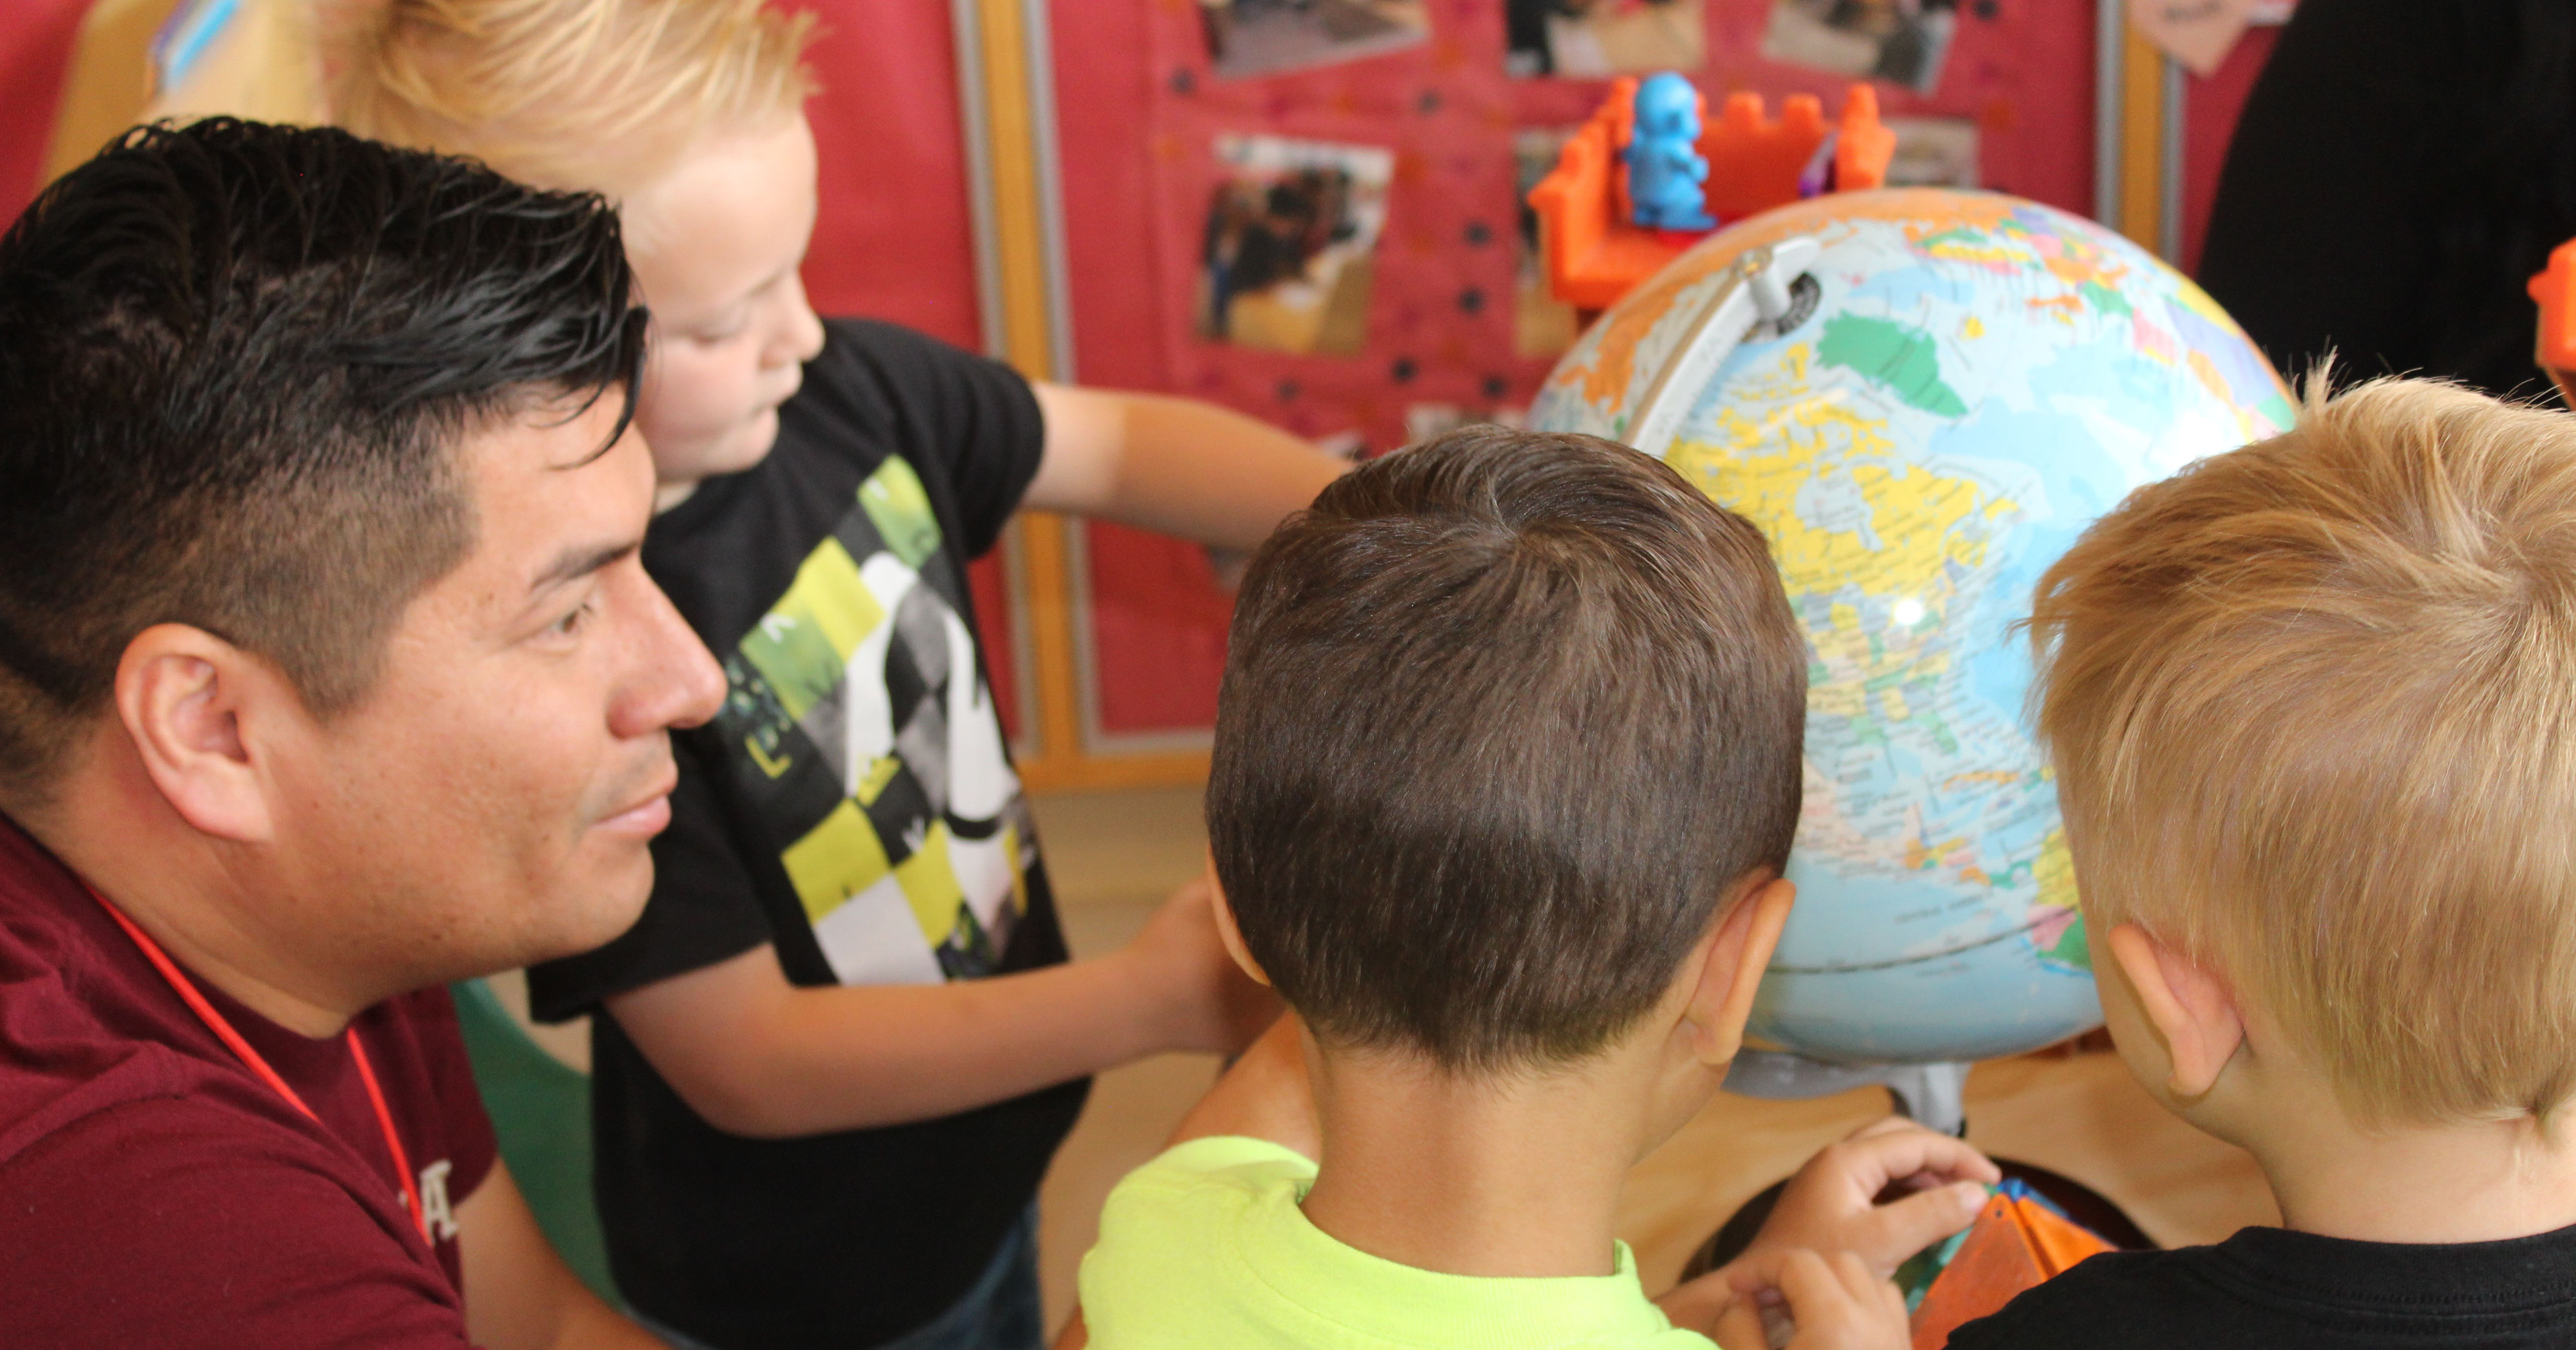 Male teacher and students looking at a globe.